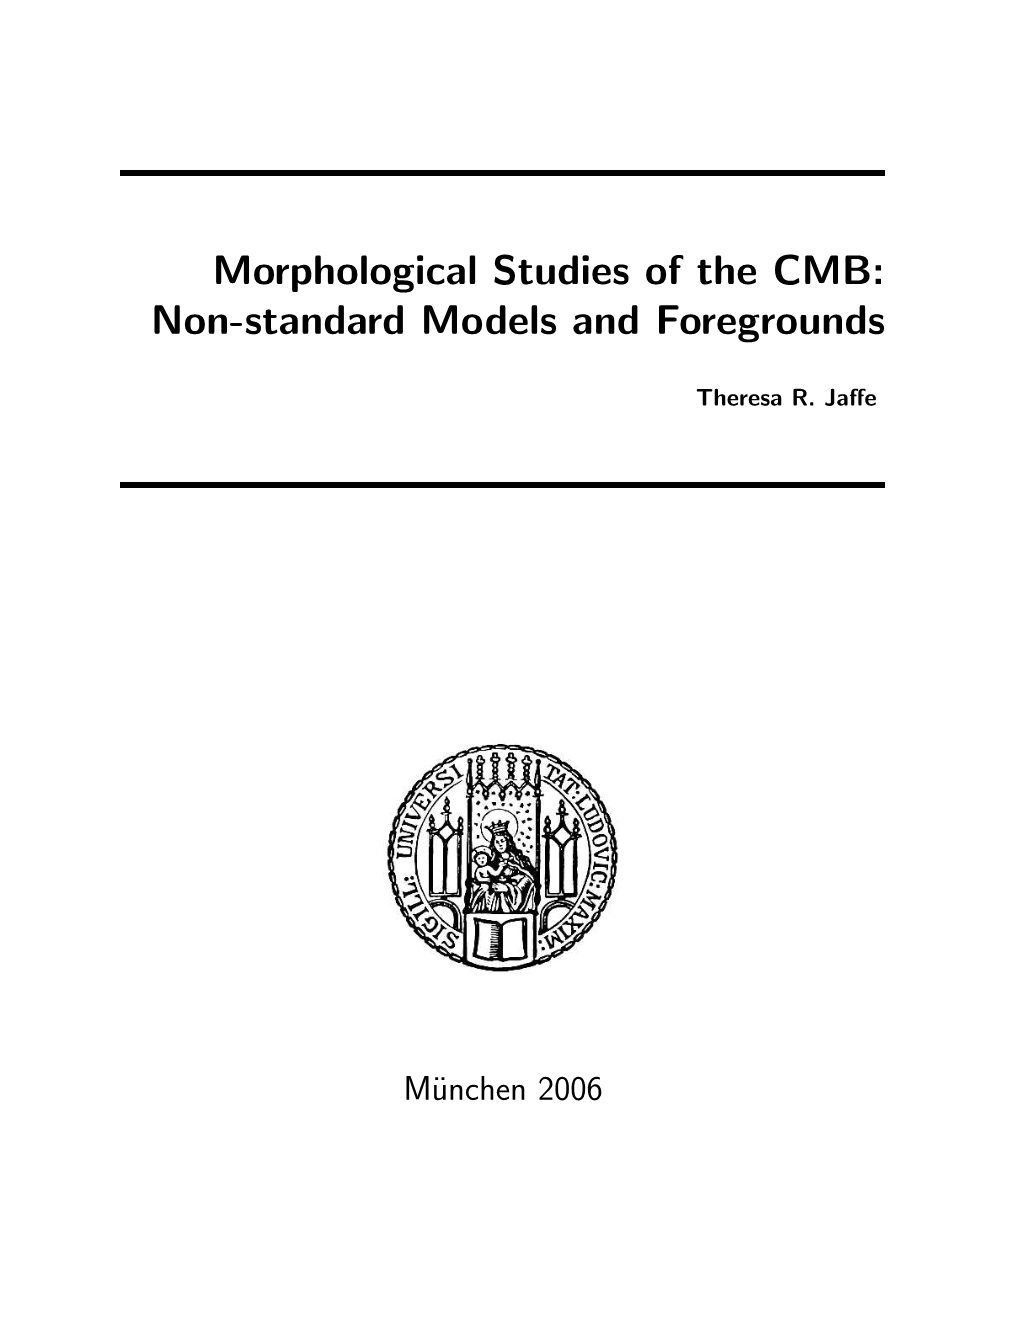 Morphological Studies of the CMB: Non-Standard Models and Foregrounds